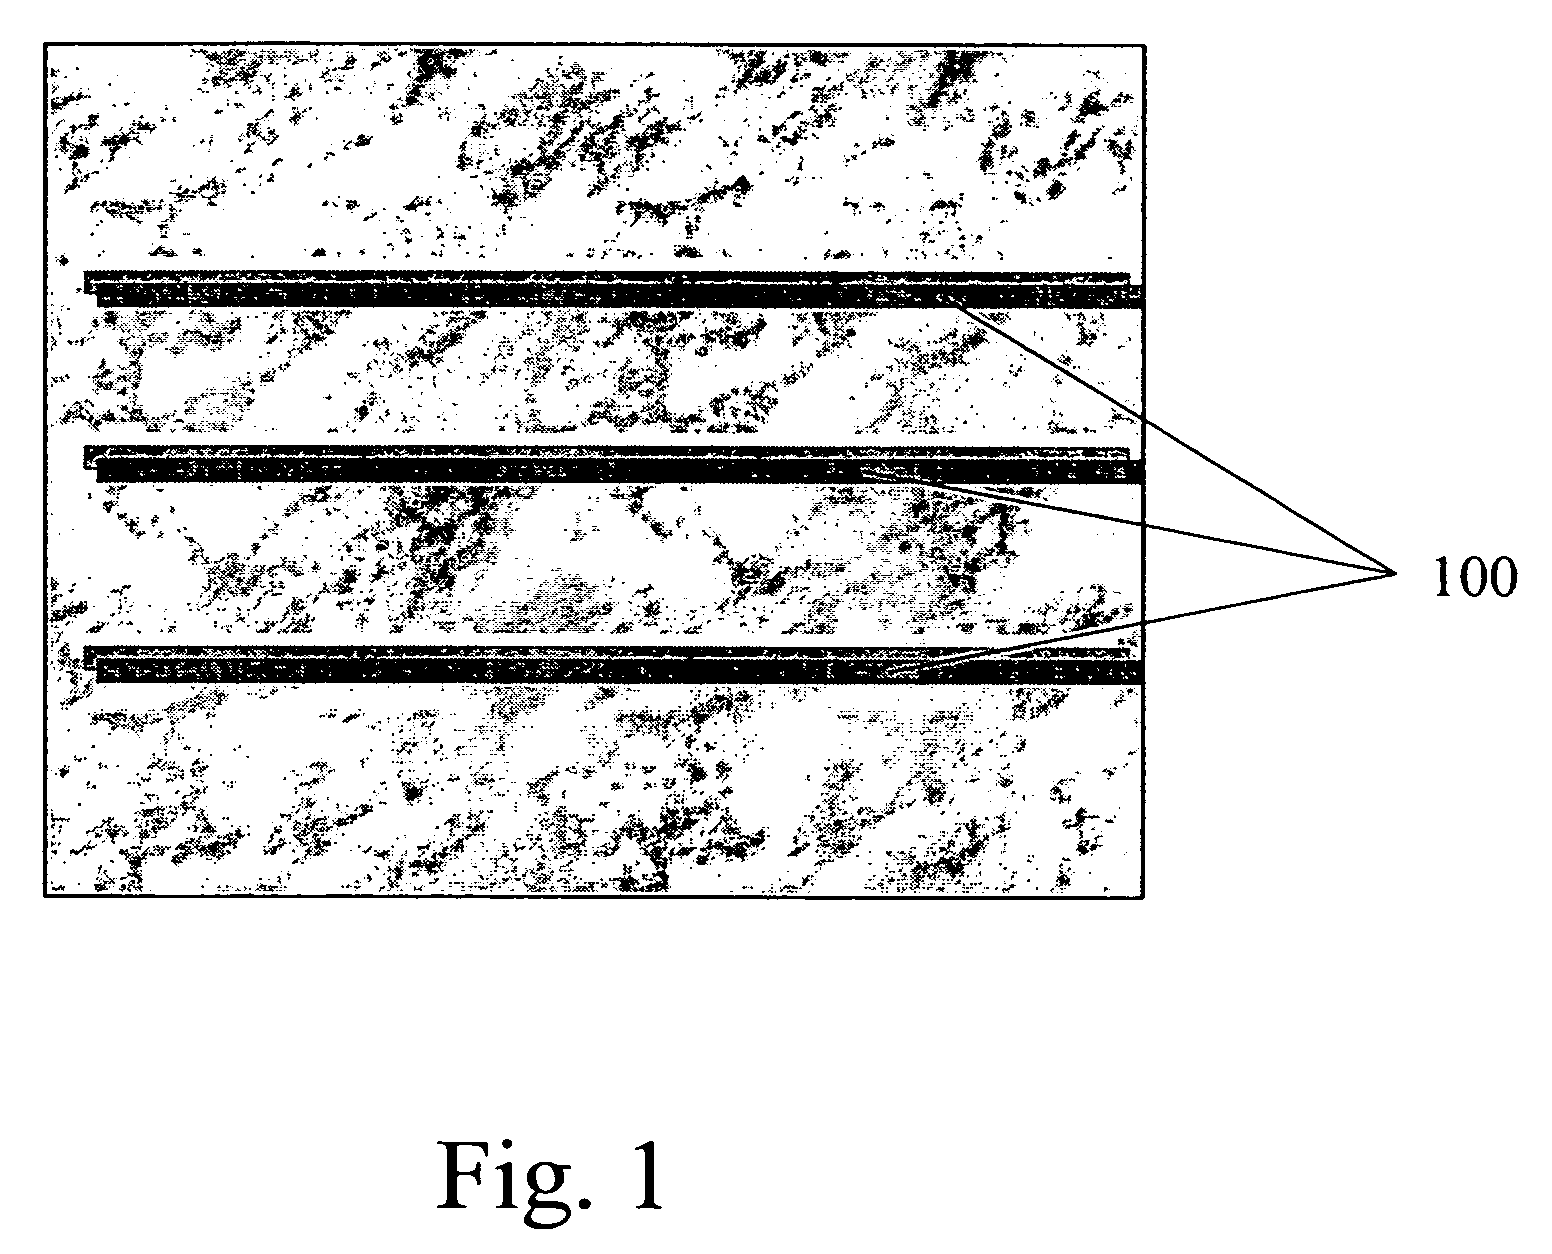 Exposure time selection in a transmission apparatus with a camera